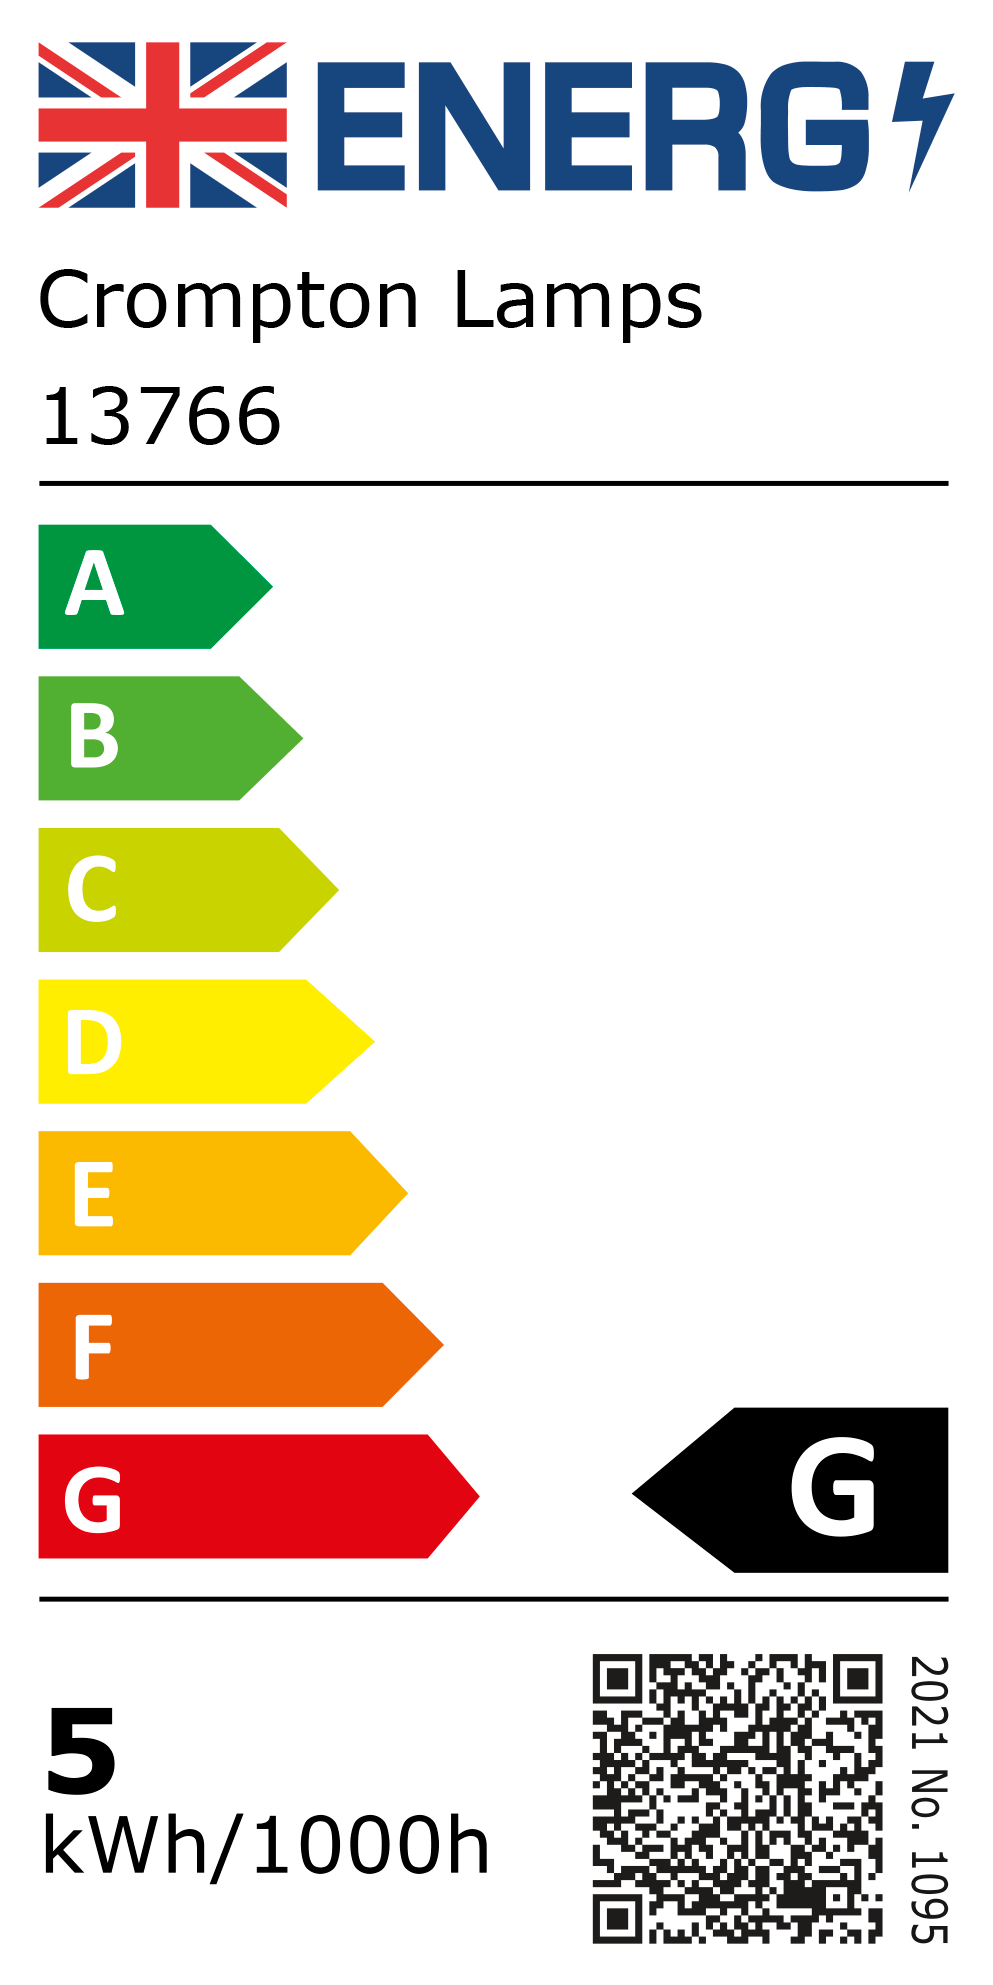 New 2021 Energy Rating Label: Stock Code 13766